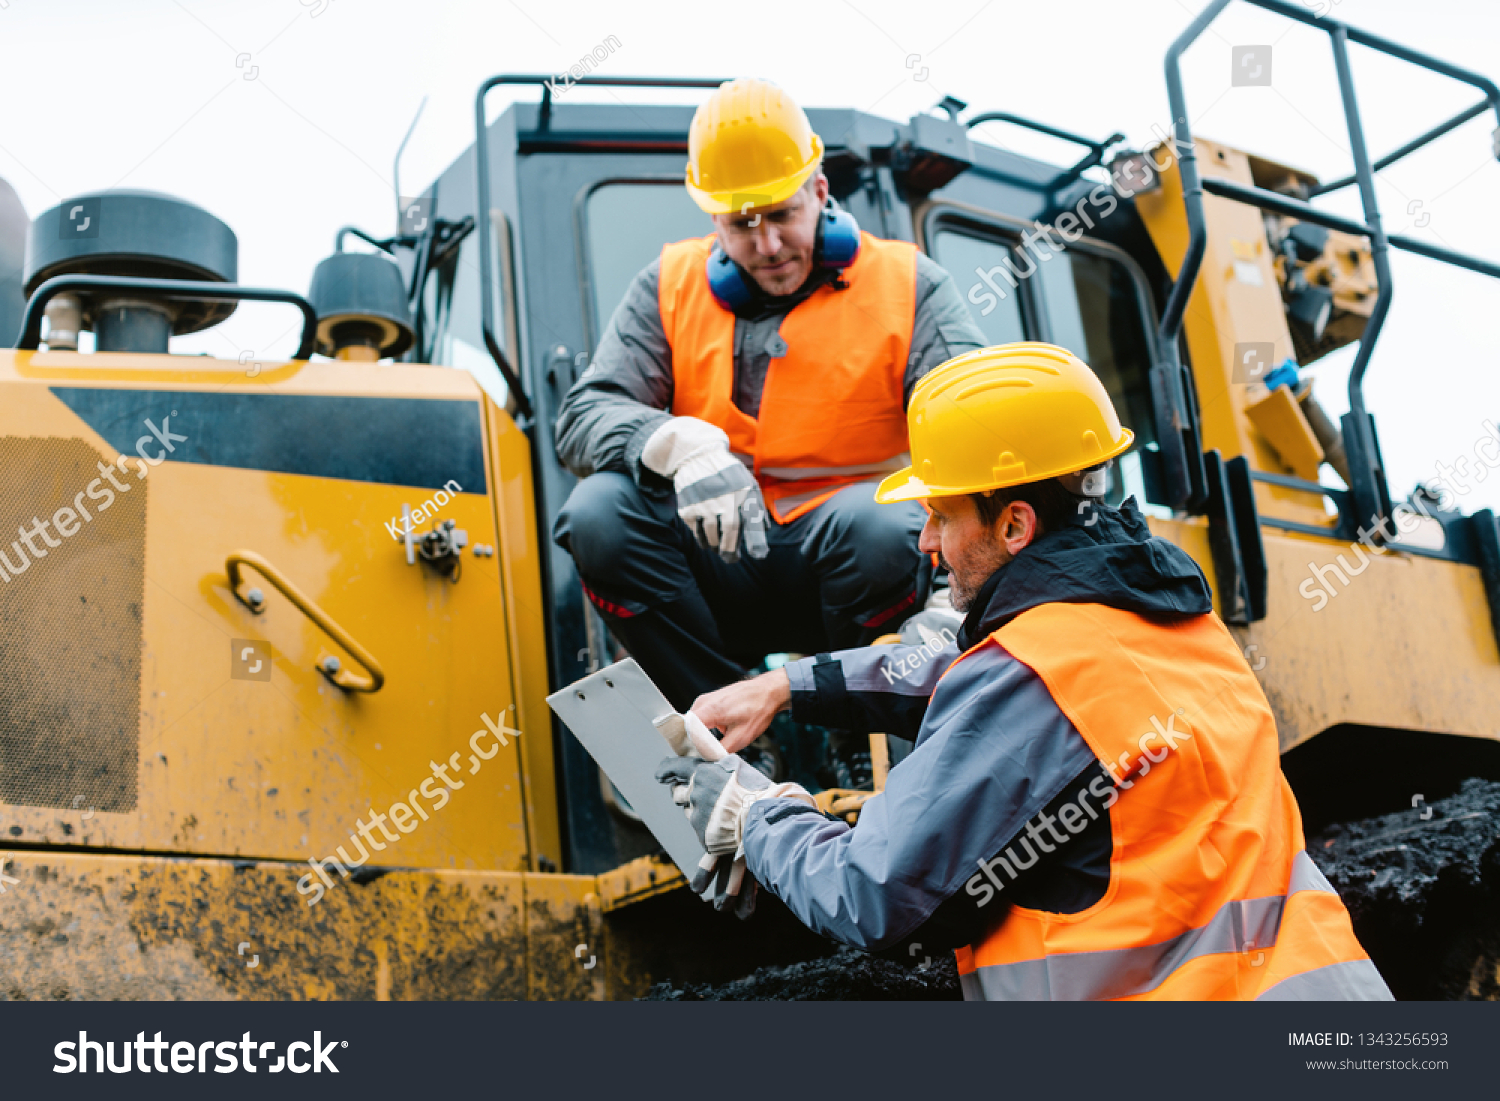 stock-photo-worker-sitting-on-heavy-excavation-machinery-in-mining-operation-1343256593